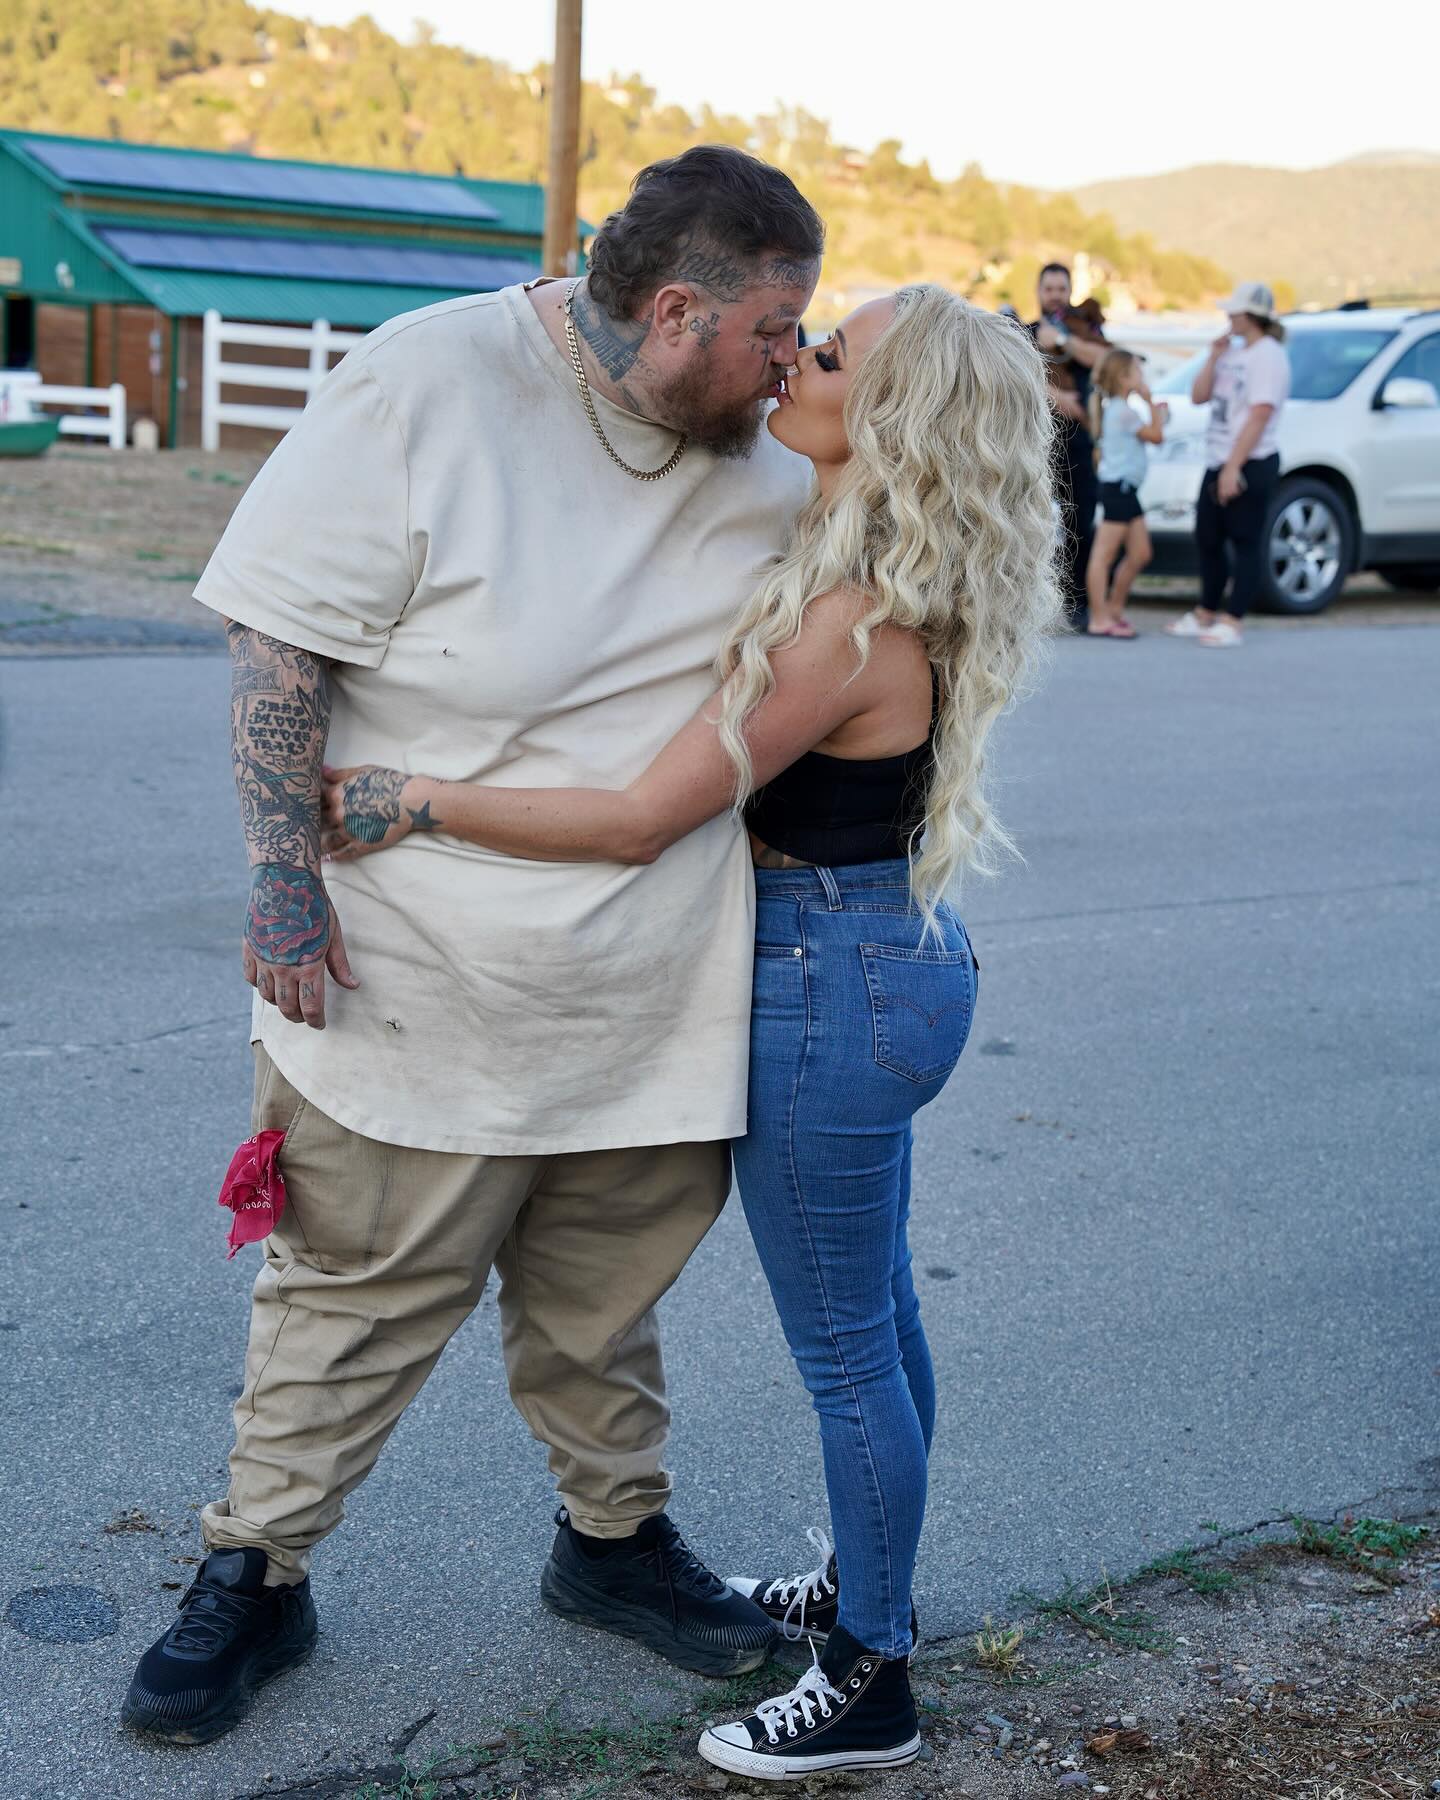 Jelly Roll and Bunnie Xo packing on the PDA while in Nashville